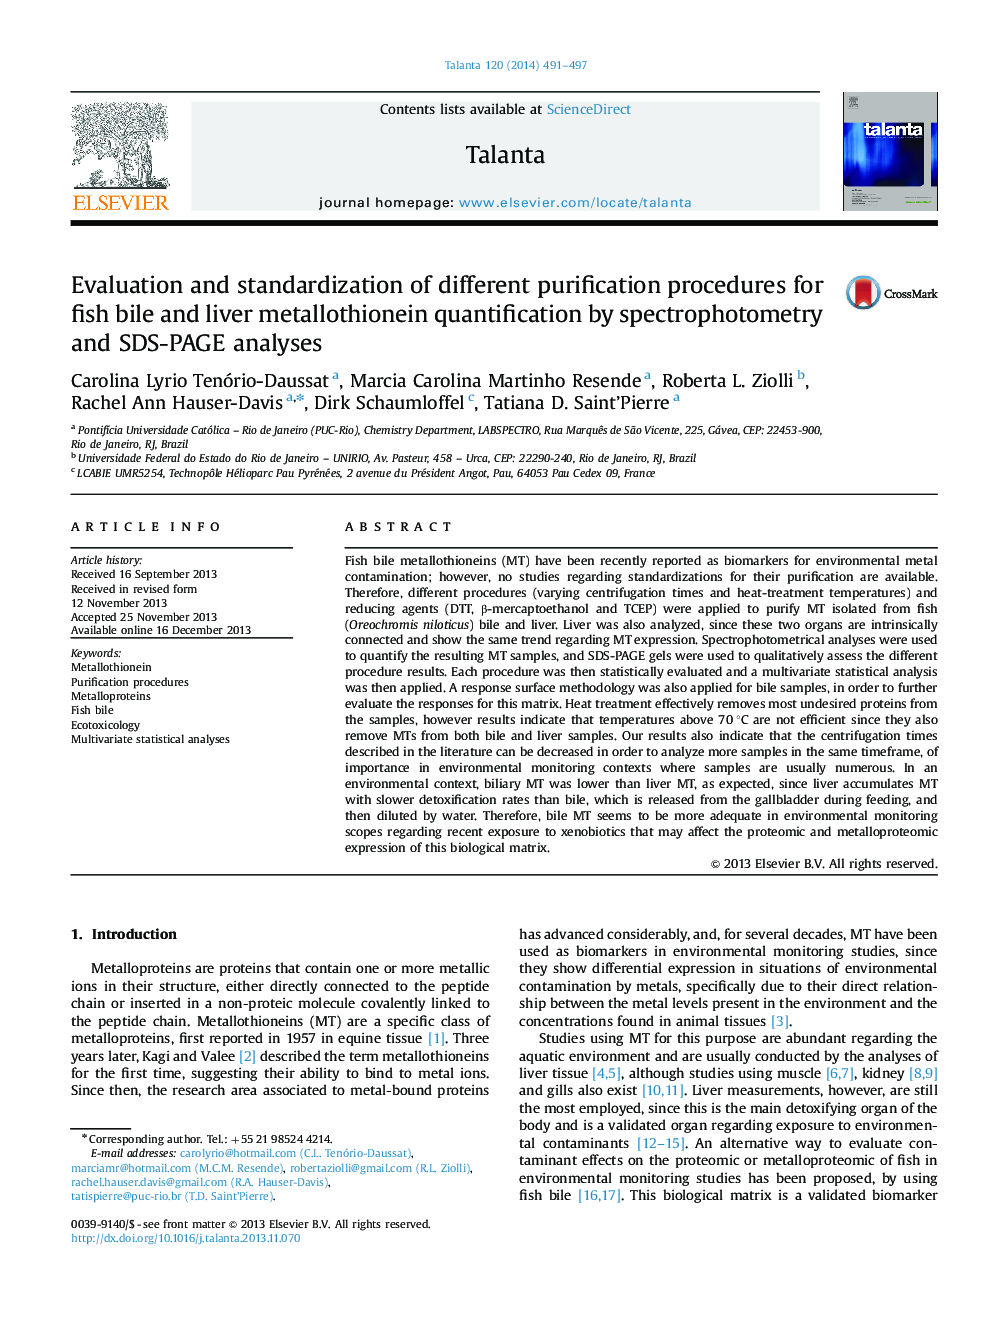 Evaluation and standardization of different purification procedures for fish bile and liver metallothionein quantification by spectrophotometry and SDS-PAGE analyses